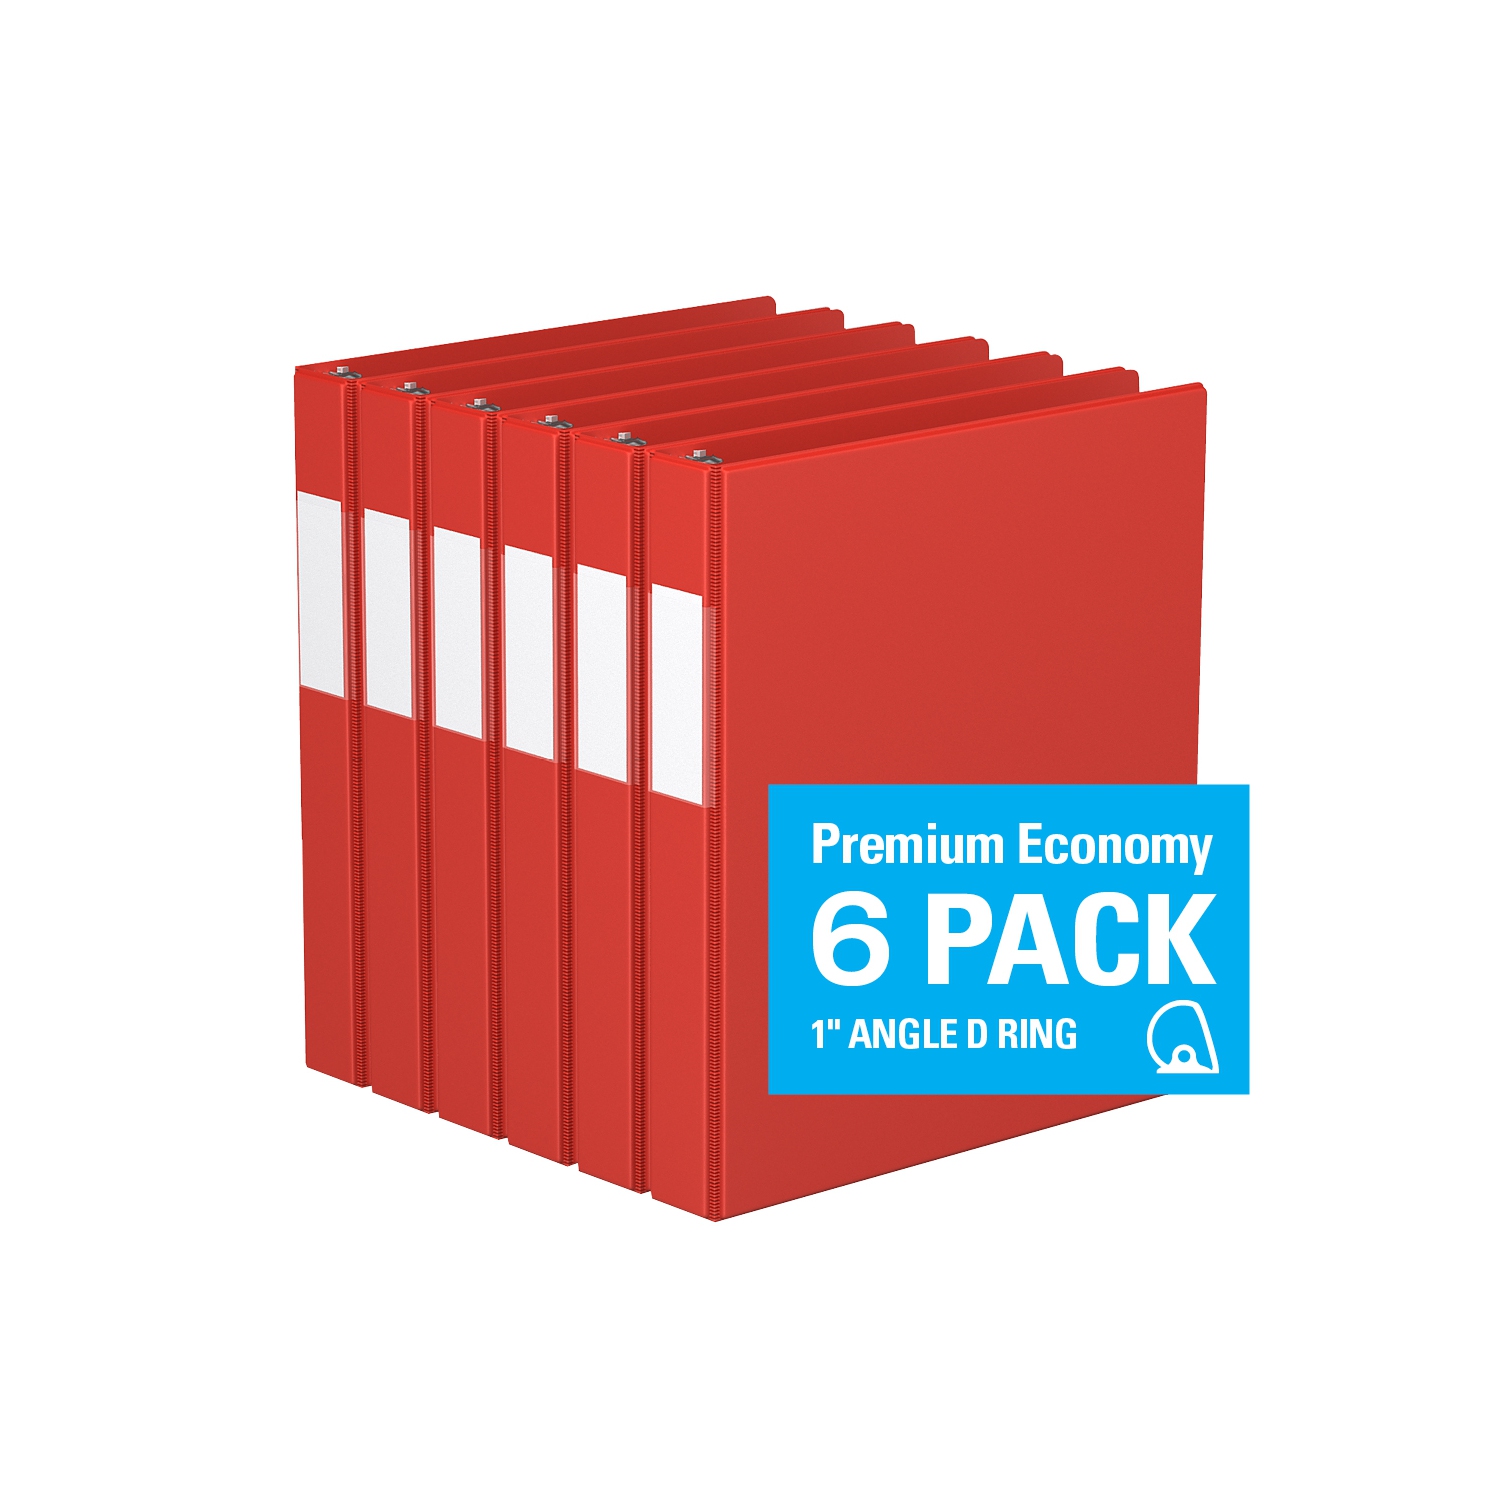 3, Red Angle D Ring Binder 6 Pack Premium Economy 